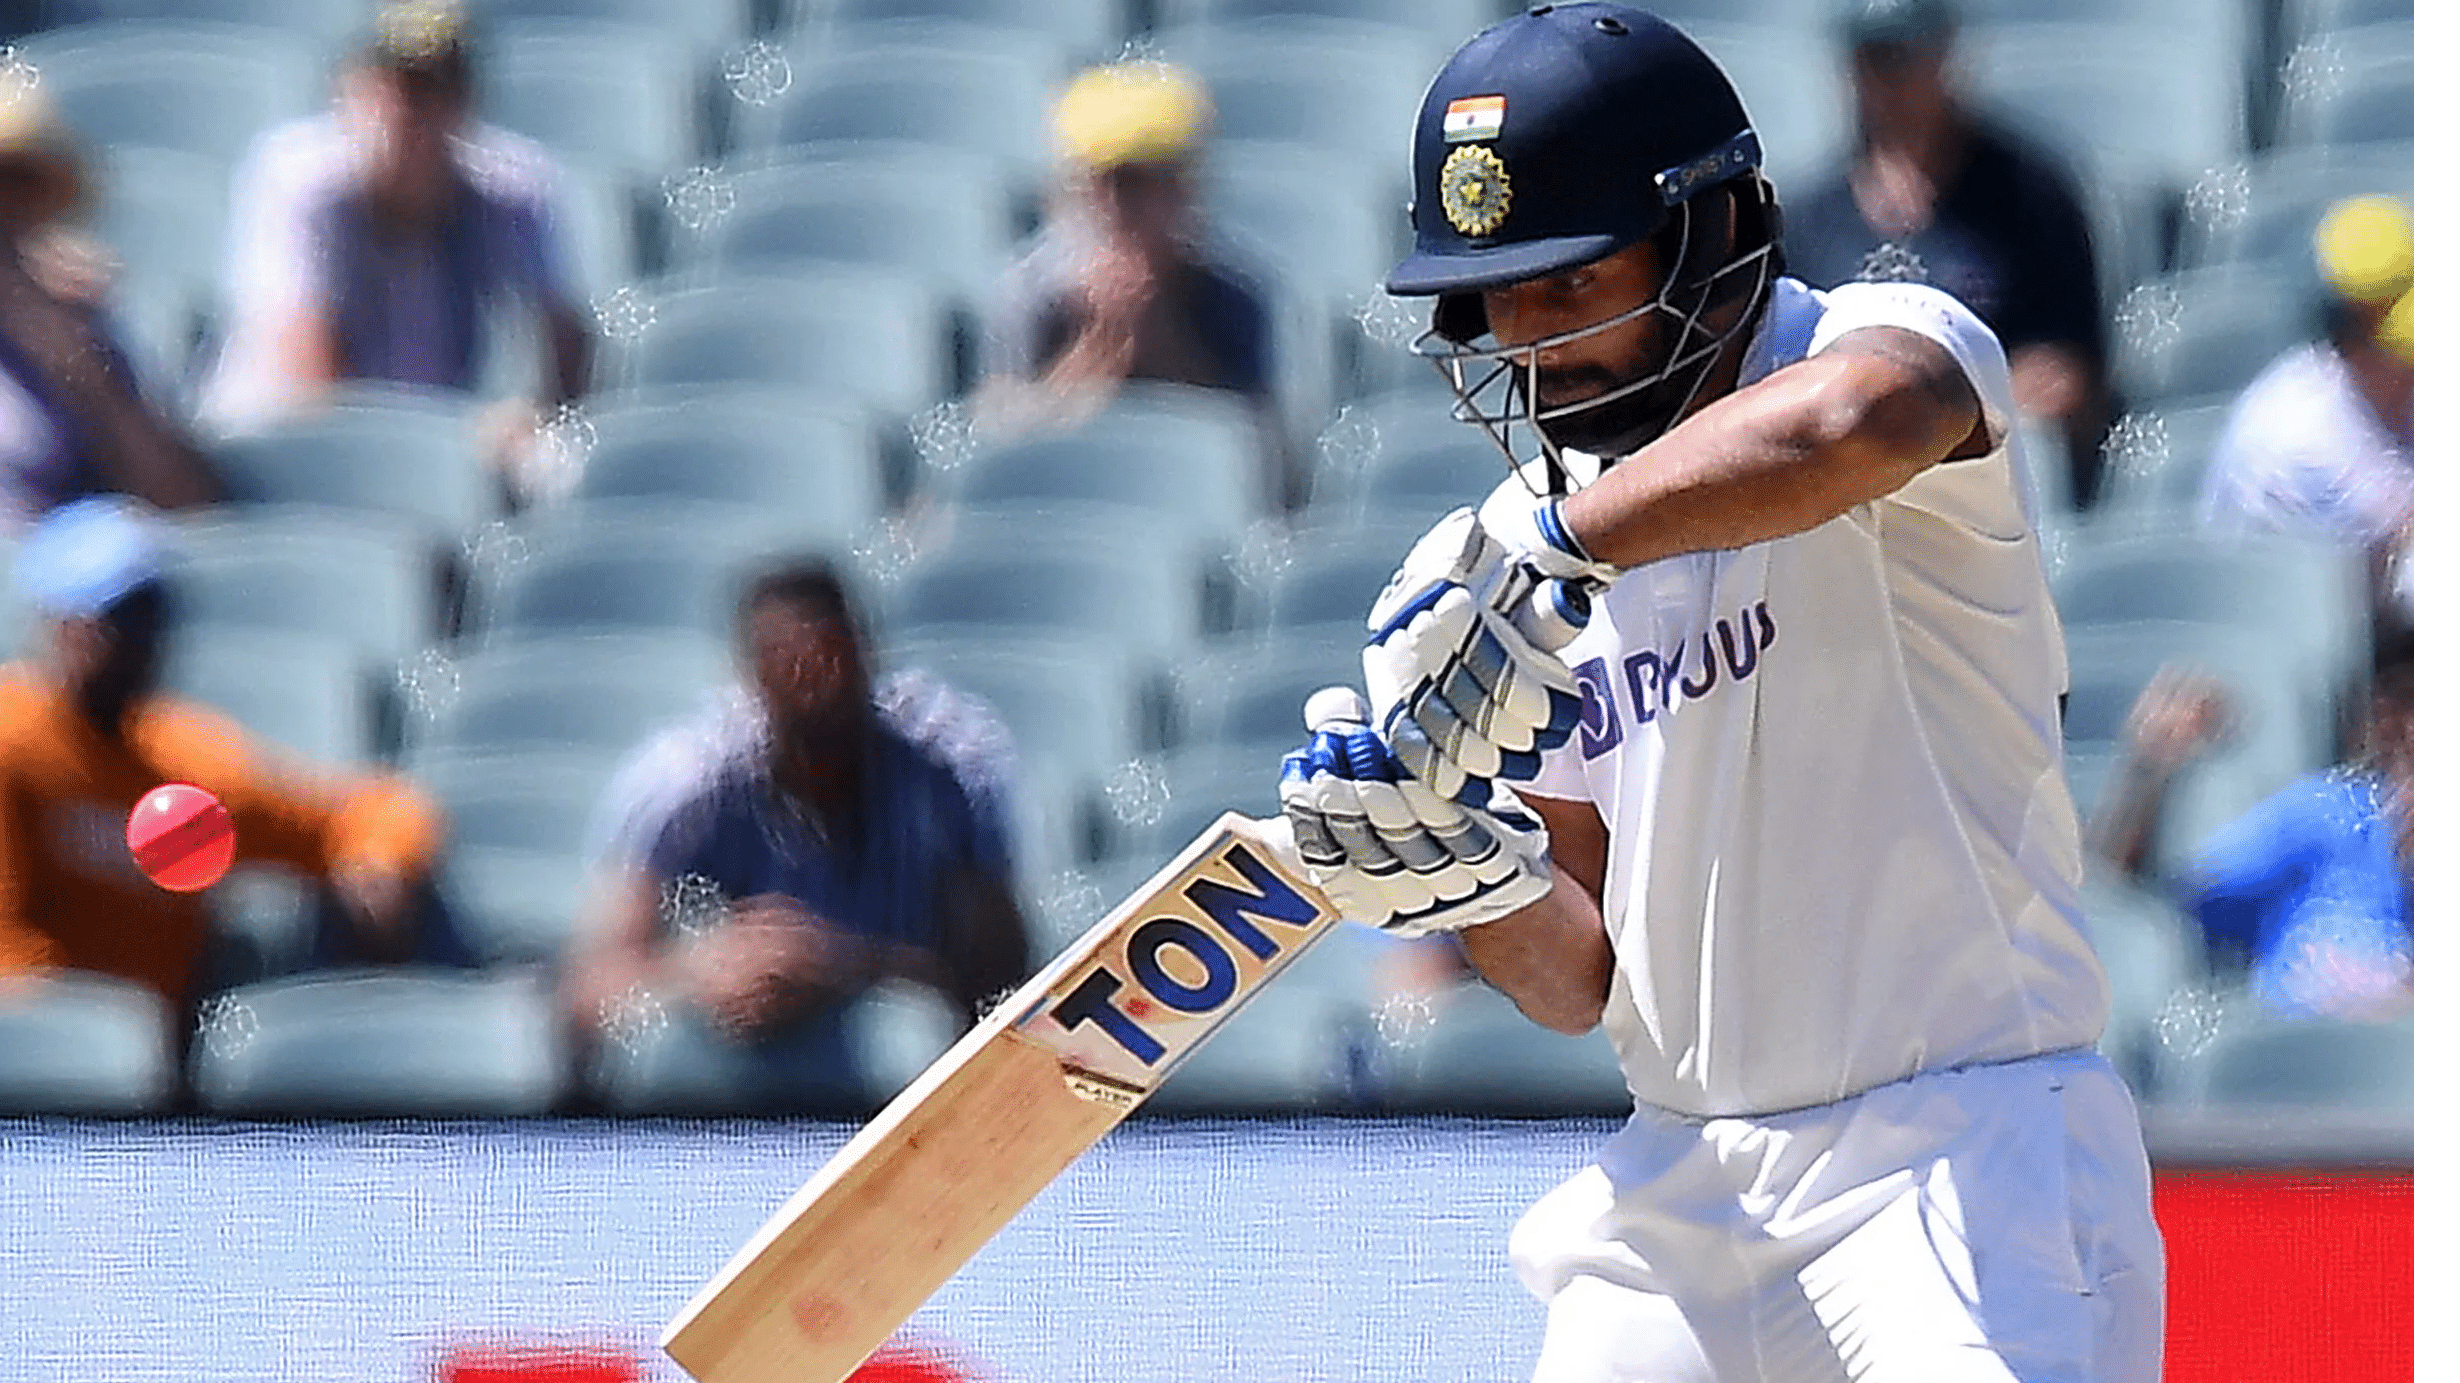 Ahead of England Test, Indian batsmen among runs on final day of warm-up game